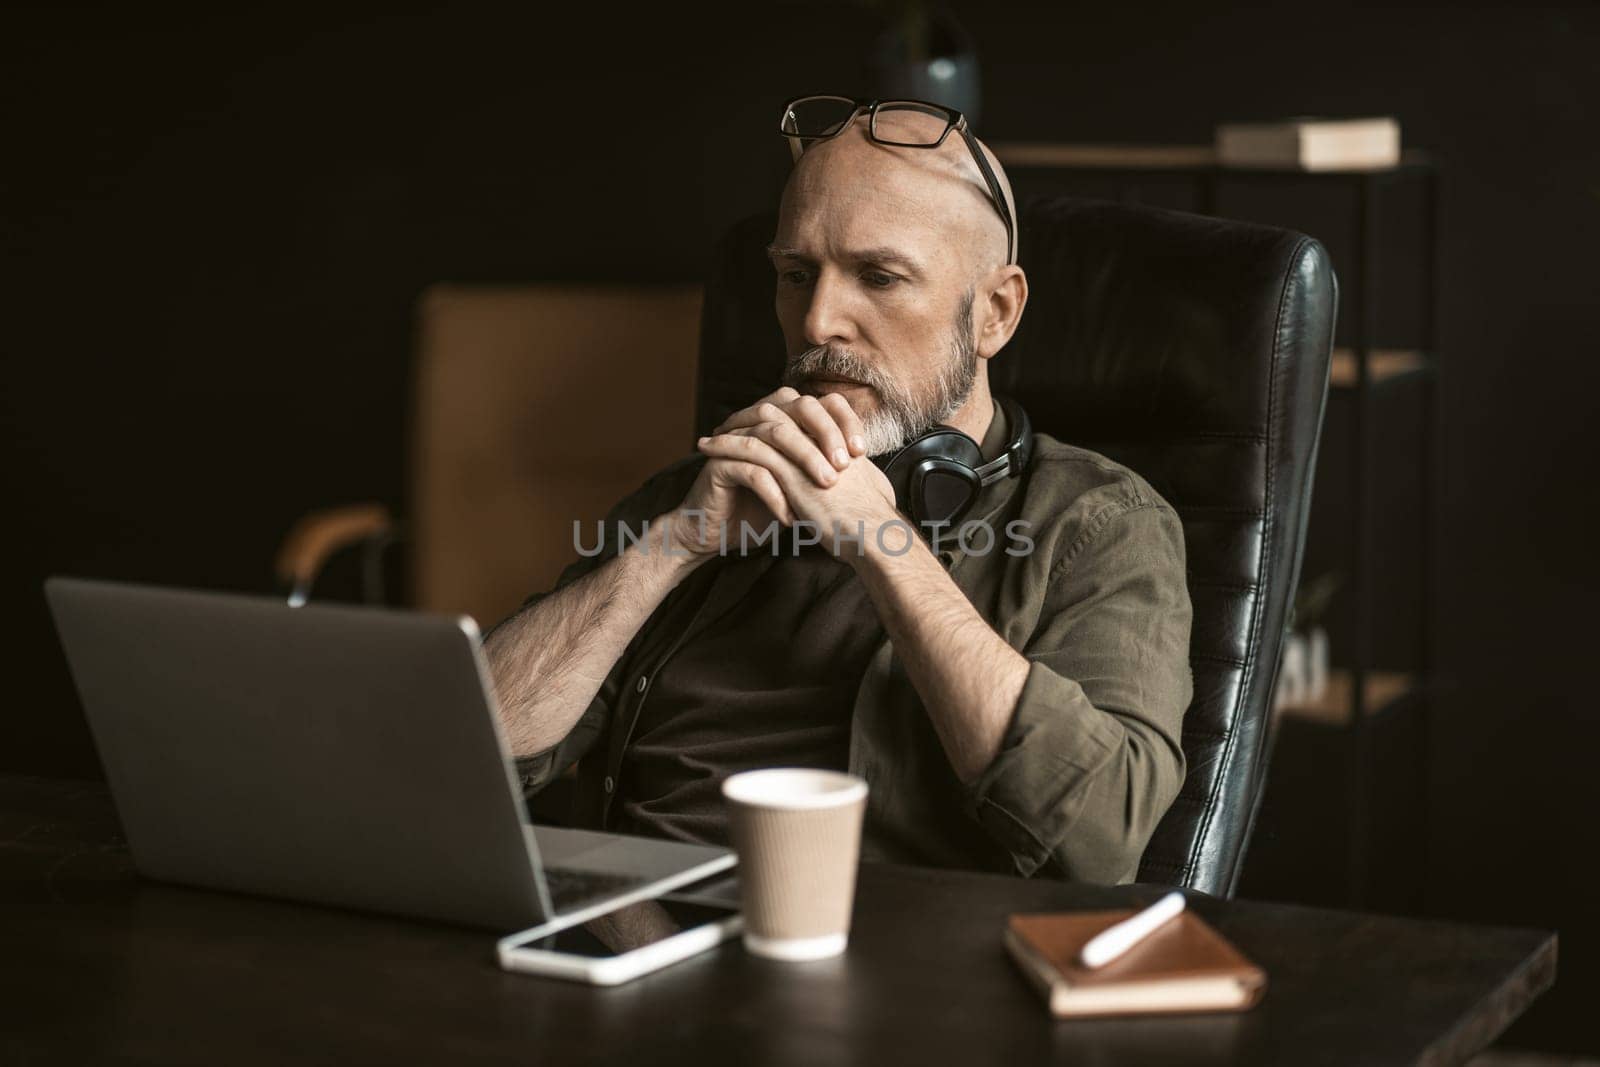 Dedicated elderly worker in loft office environment. With puzzled expression on his face, he sits attentively in front of a computer, deeply engaged in solving a complex problem. by LipikStockMedia